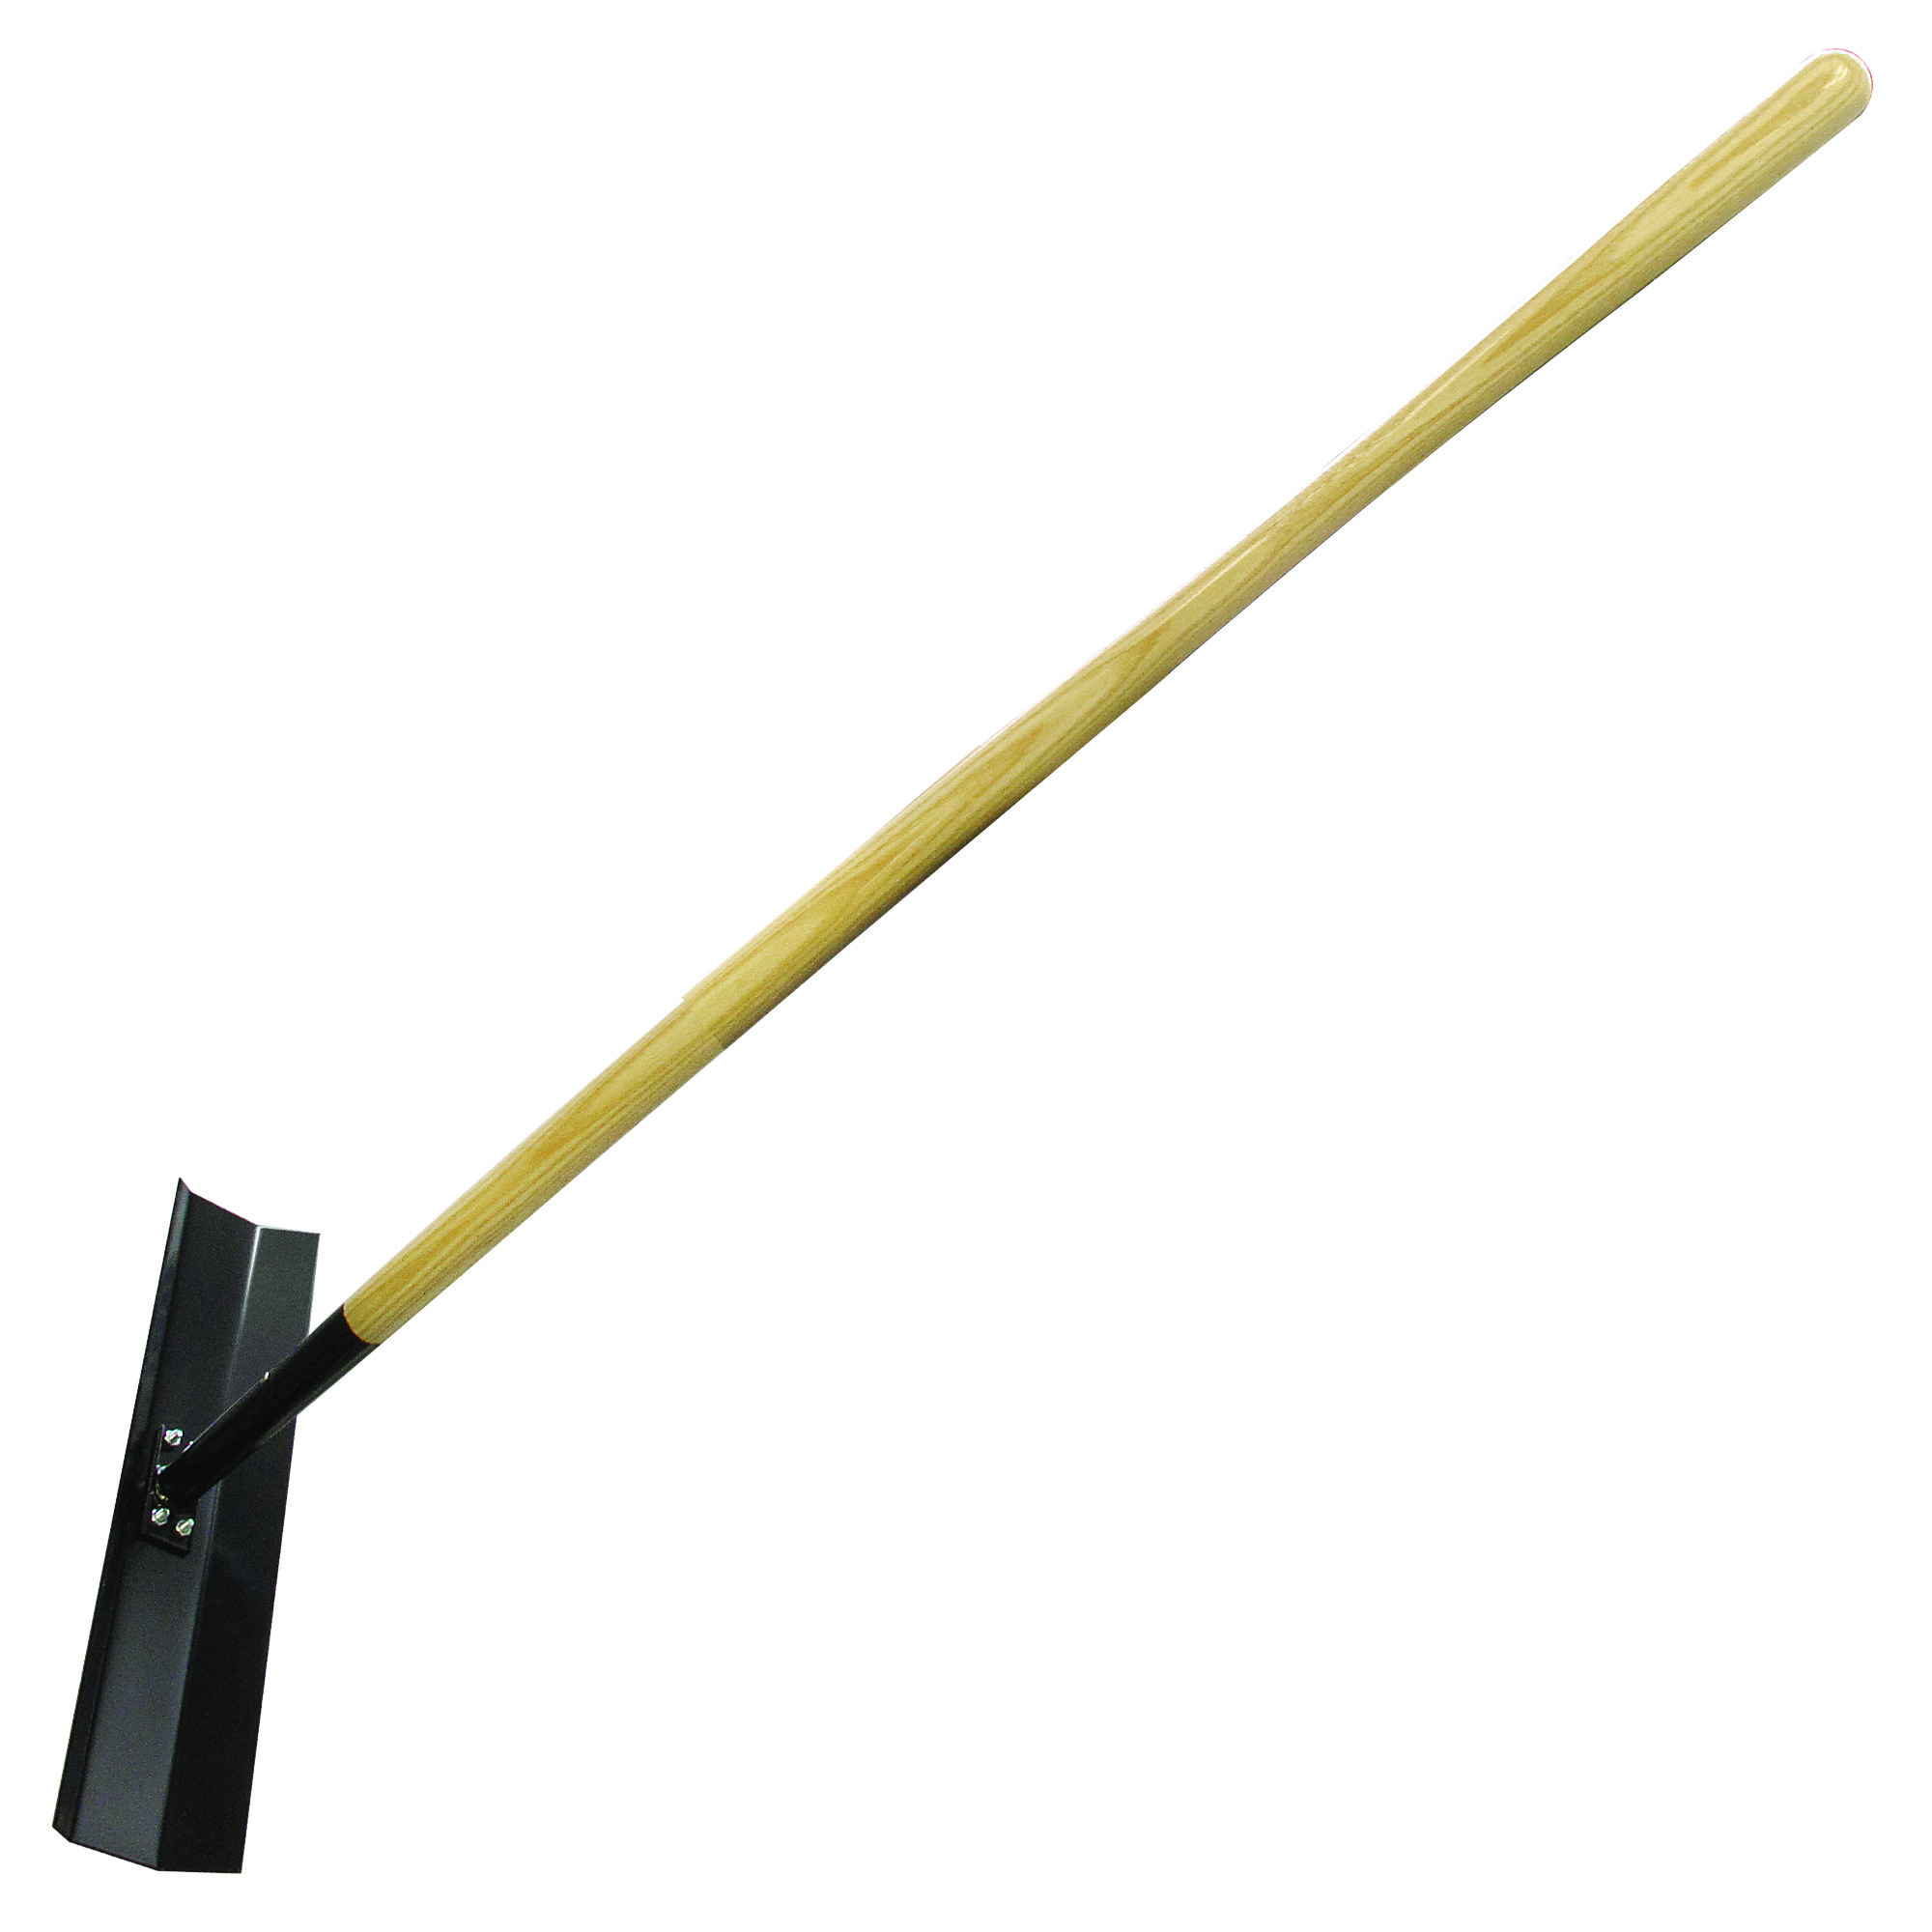 Featured image for “Long Handle Concrete Tool”